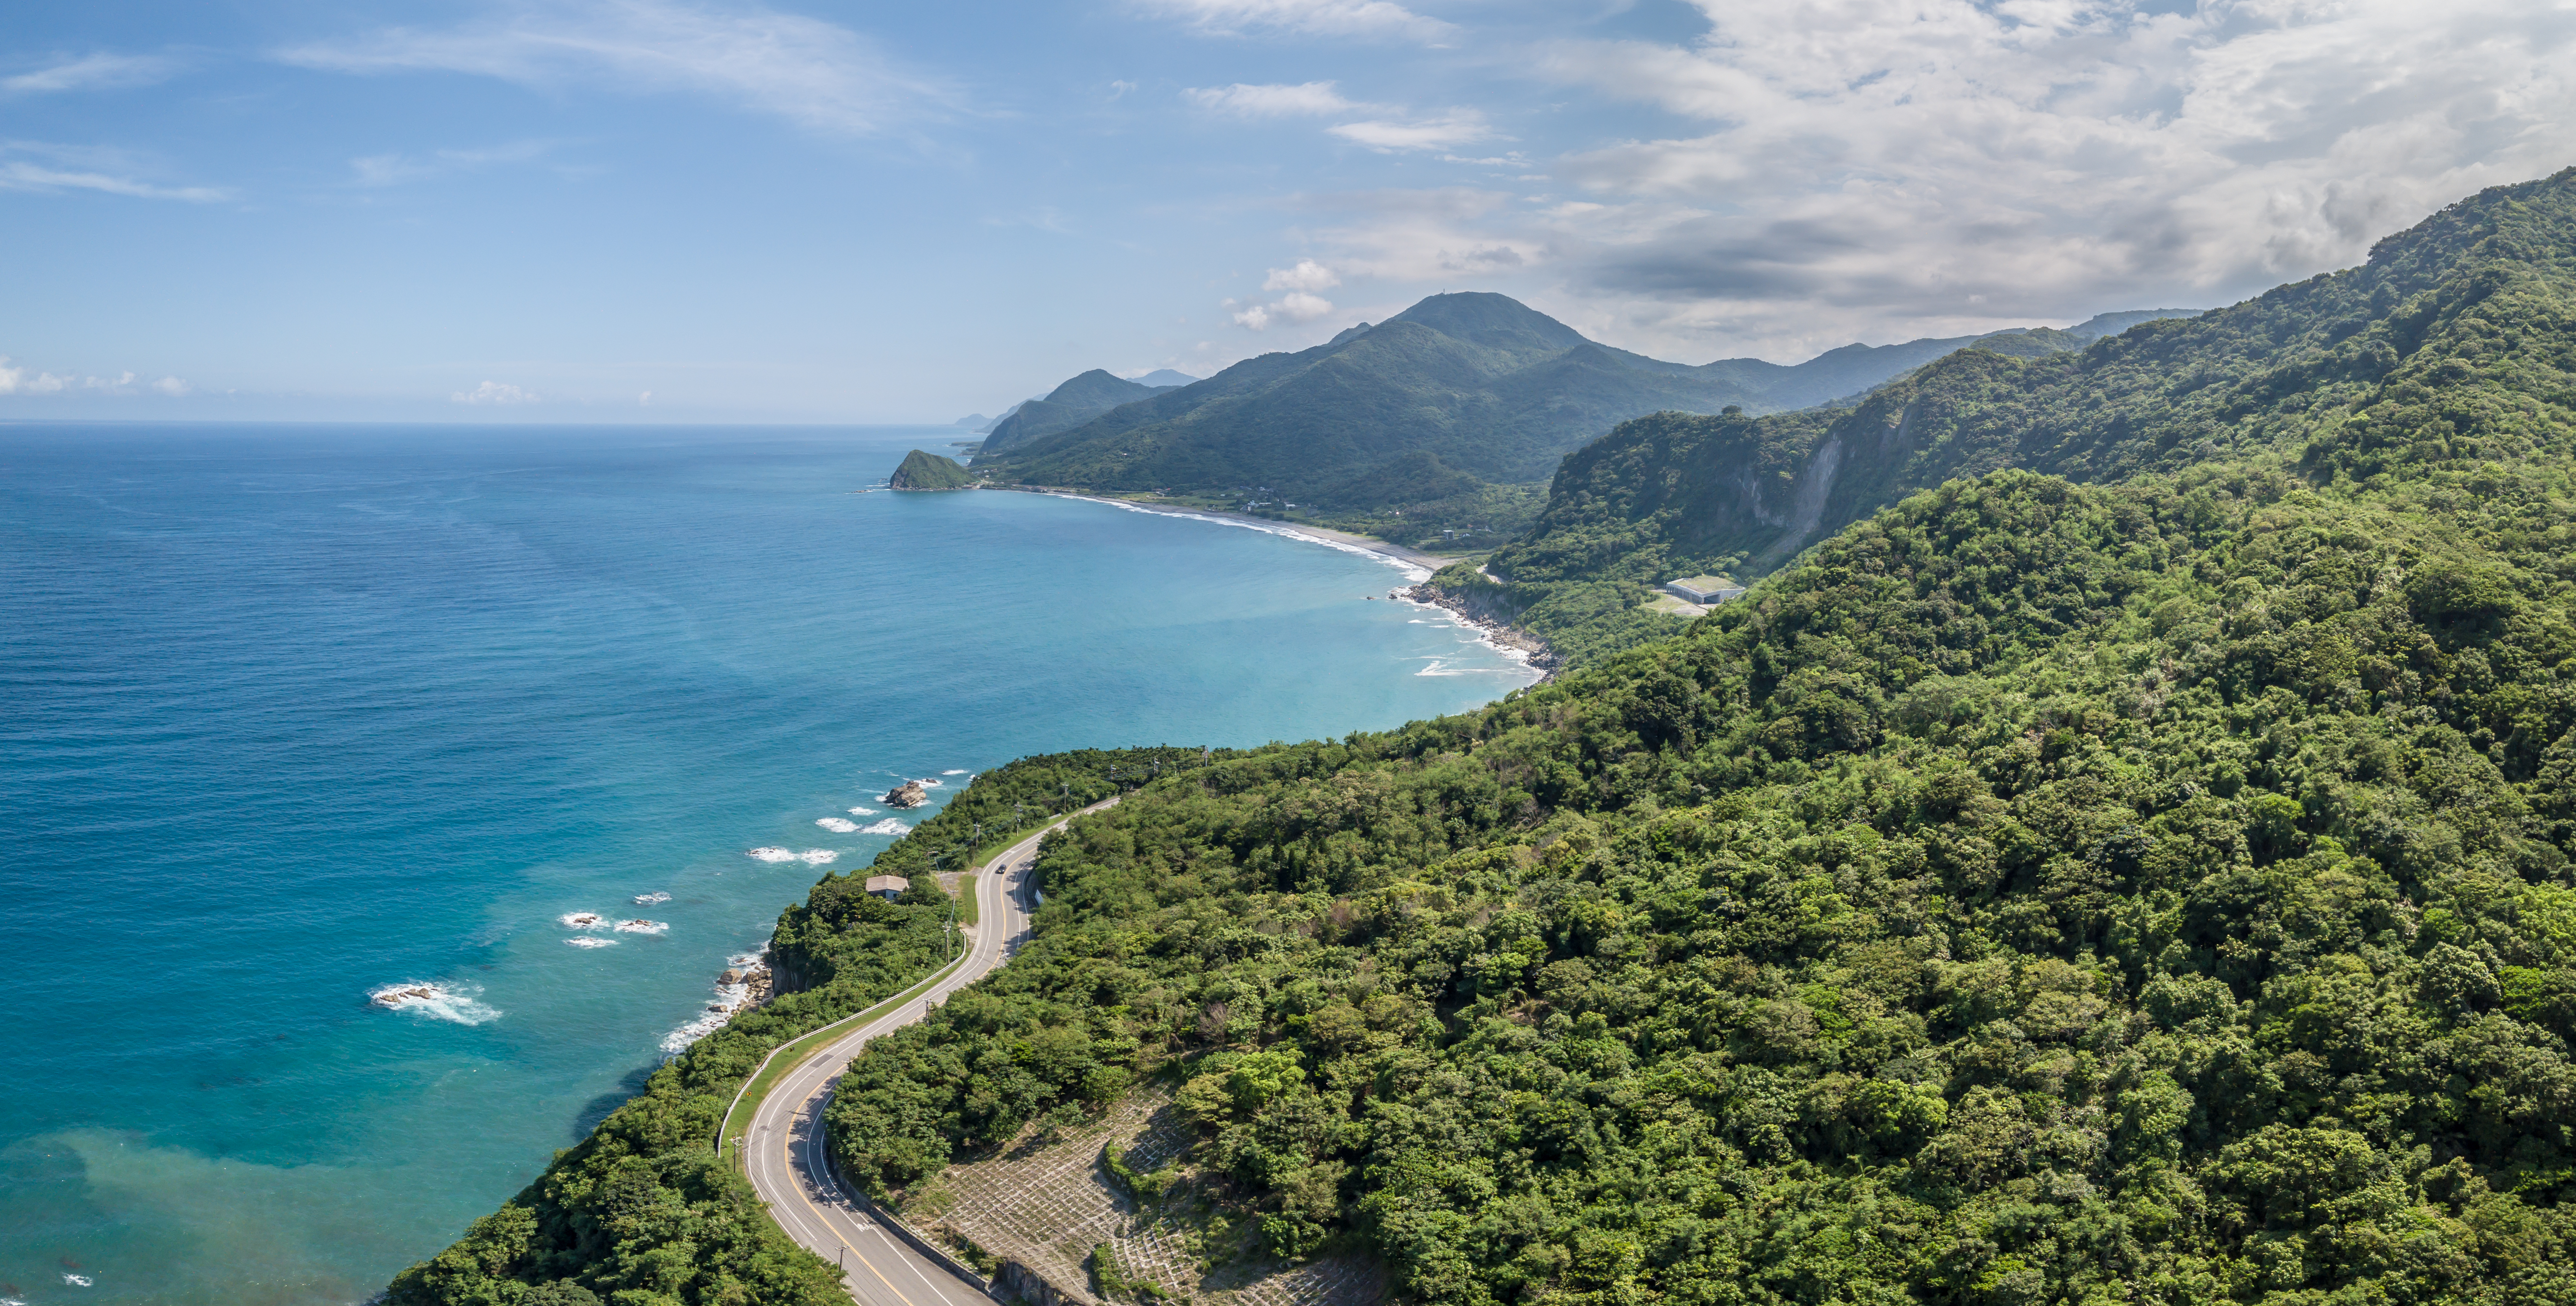 East,Coast,Of,Taiwan,With,Amazing,Ocean,And,Mountain,Views,